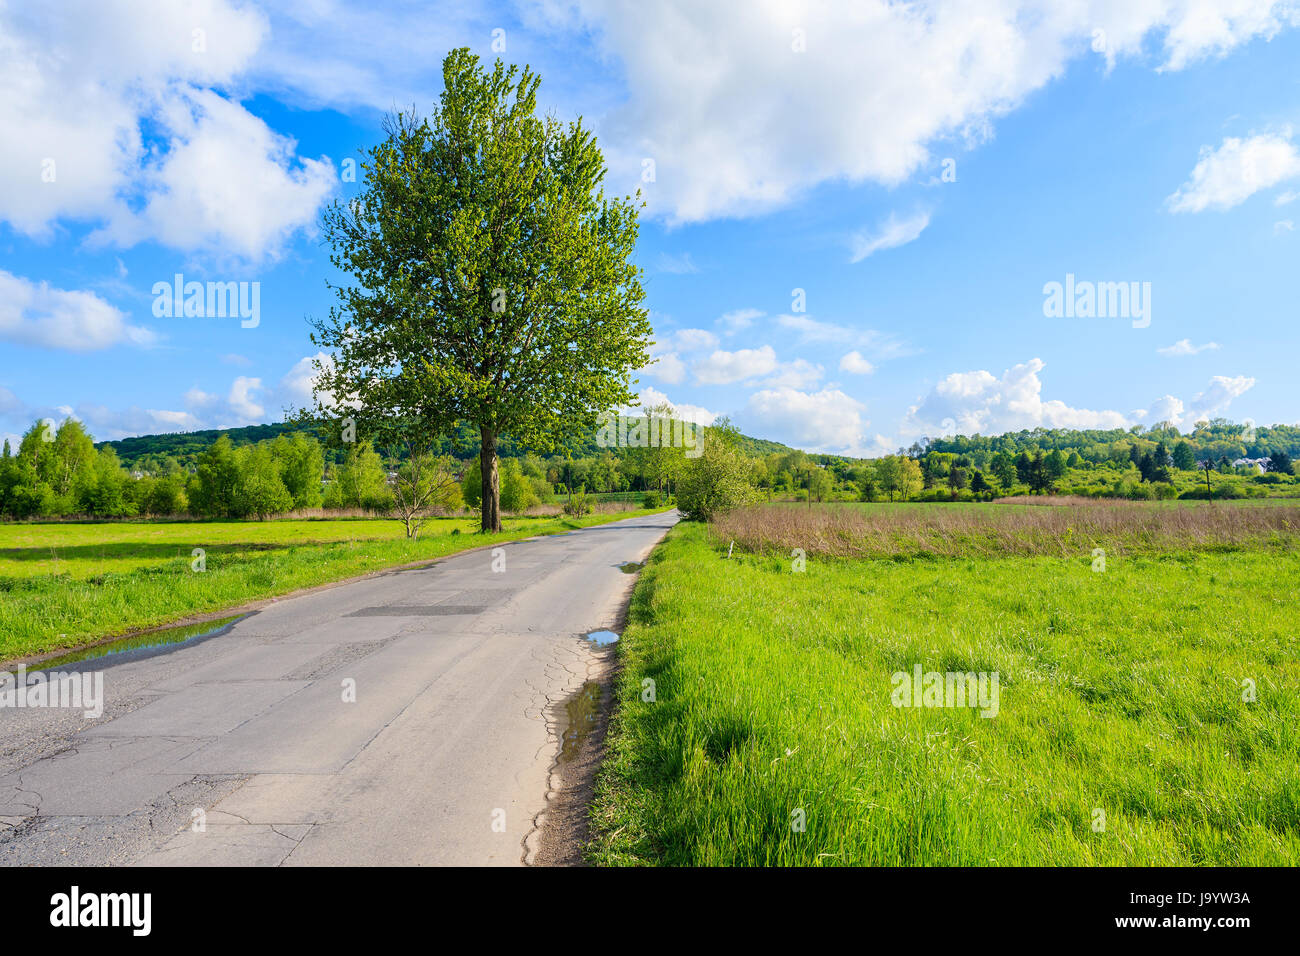 Green tree growing on side of a rural road near Krakow city on sunny spring day, Poland Stock Photo